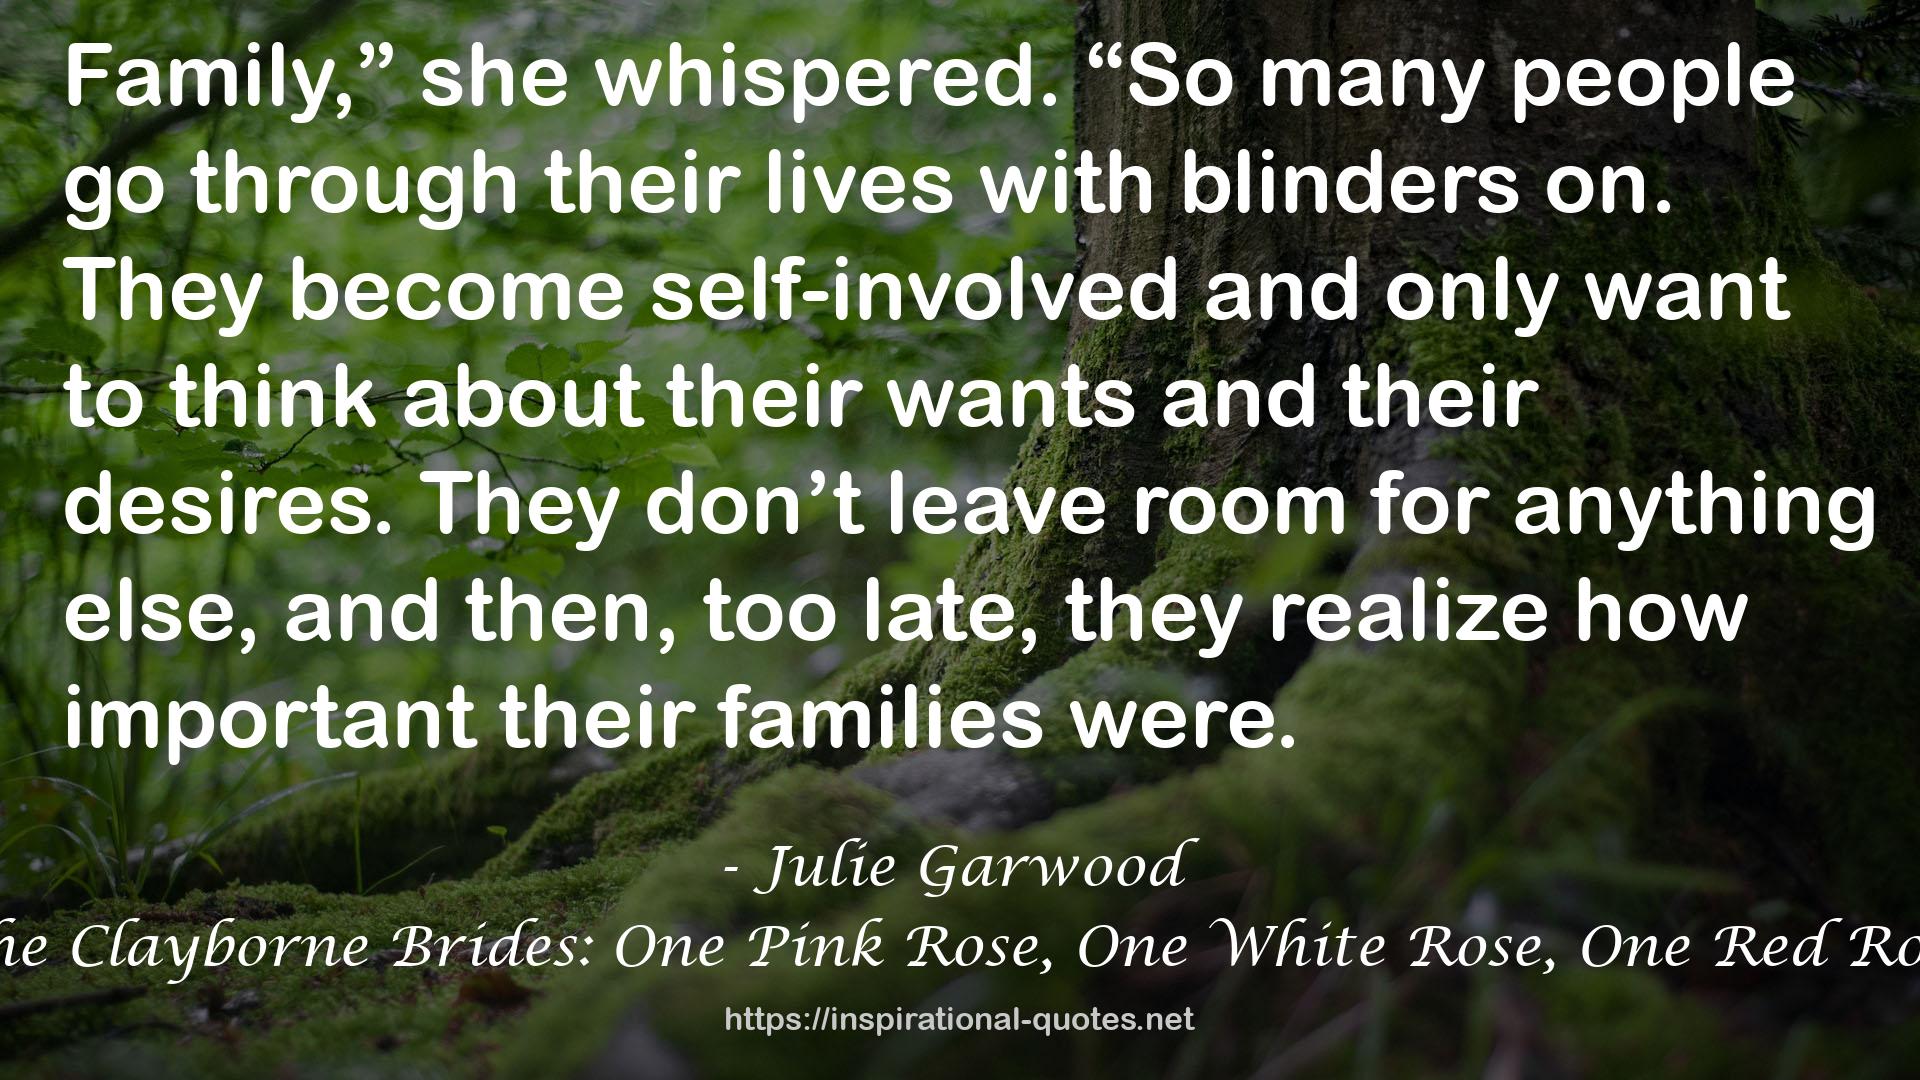 The Clayborne Brides: One Pink Rose, One White Rose, One Red Rose QUOTES